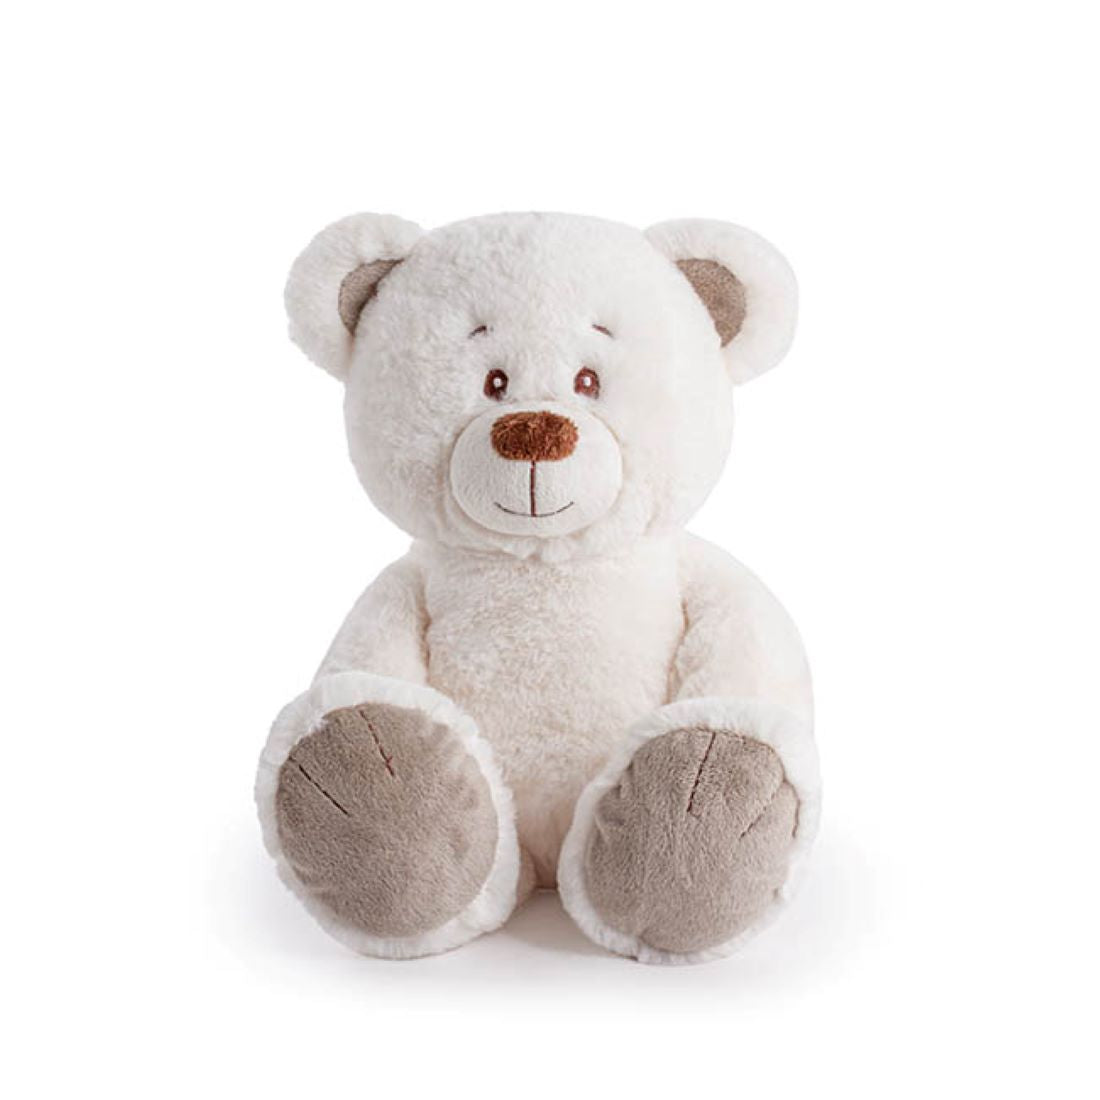 Quincy The Plush White Teddy Bear Soft Toy